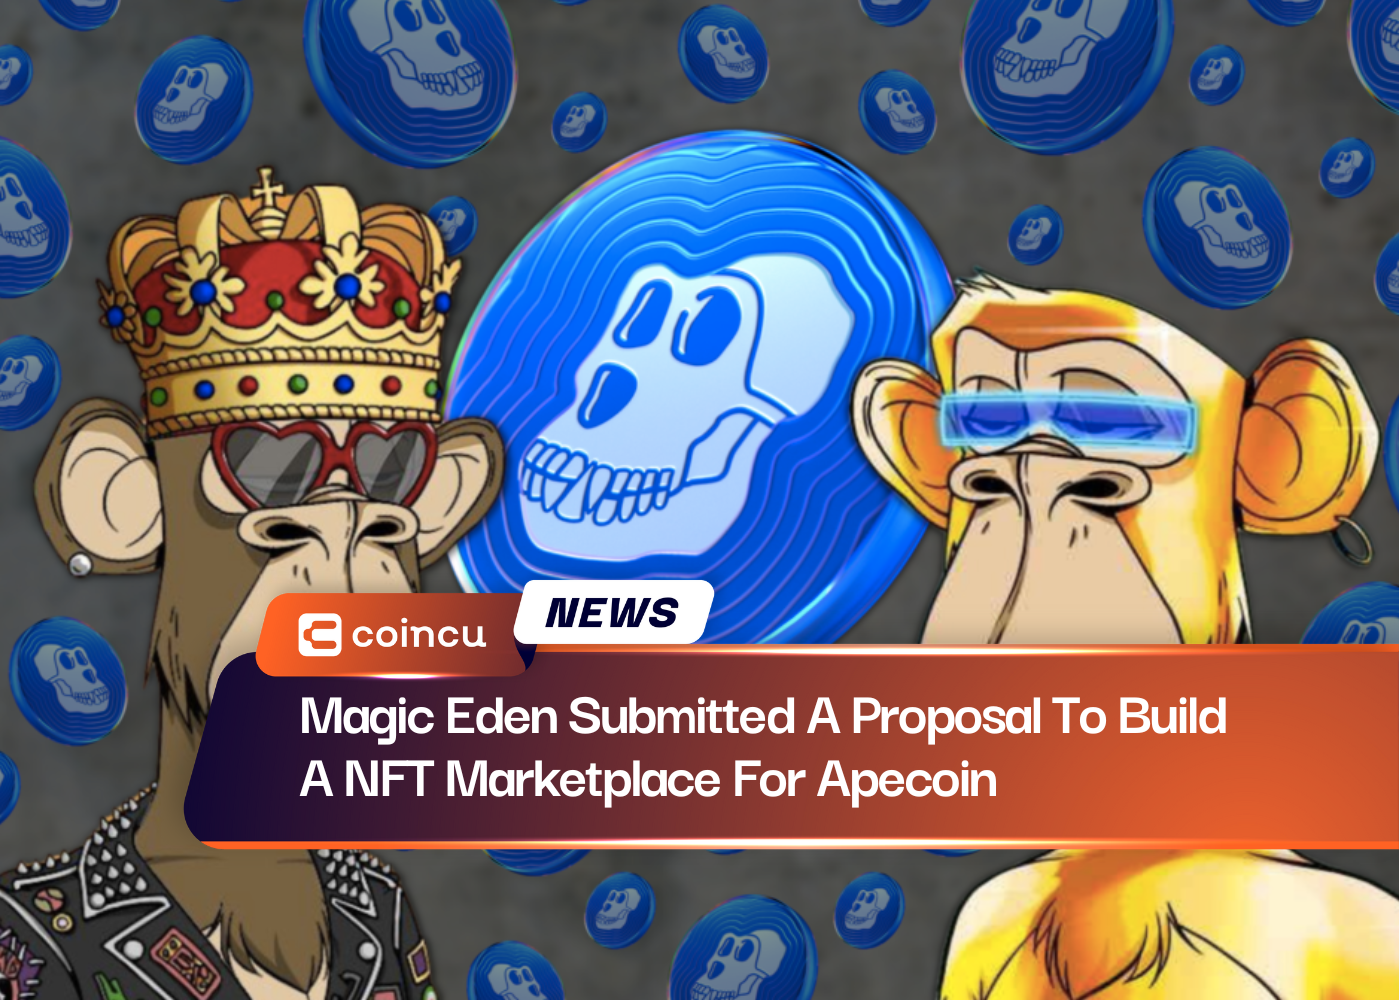 Magic Eden Submitted A Proposal To Build A NFT Marketplace For Apecoin